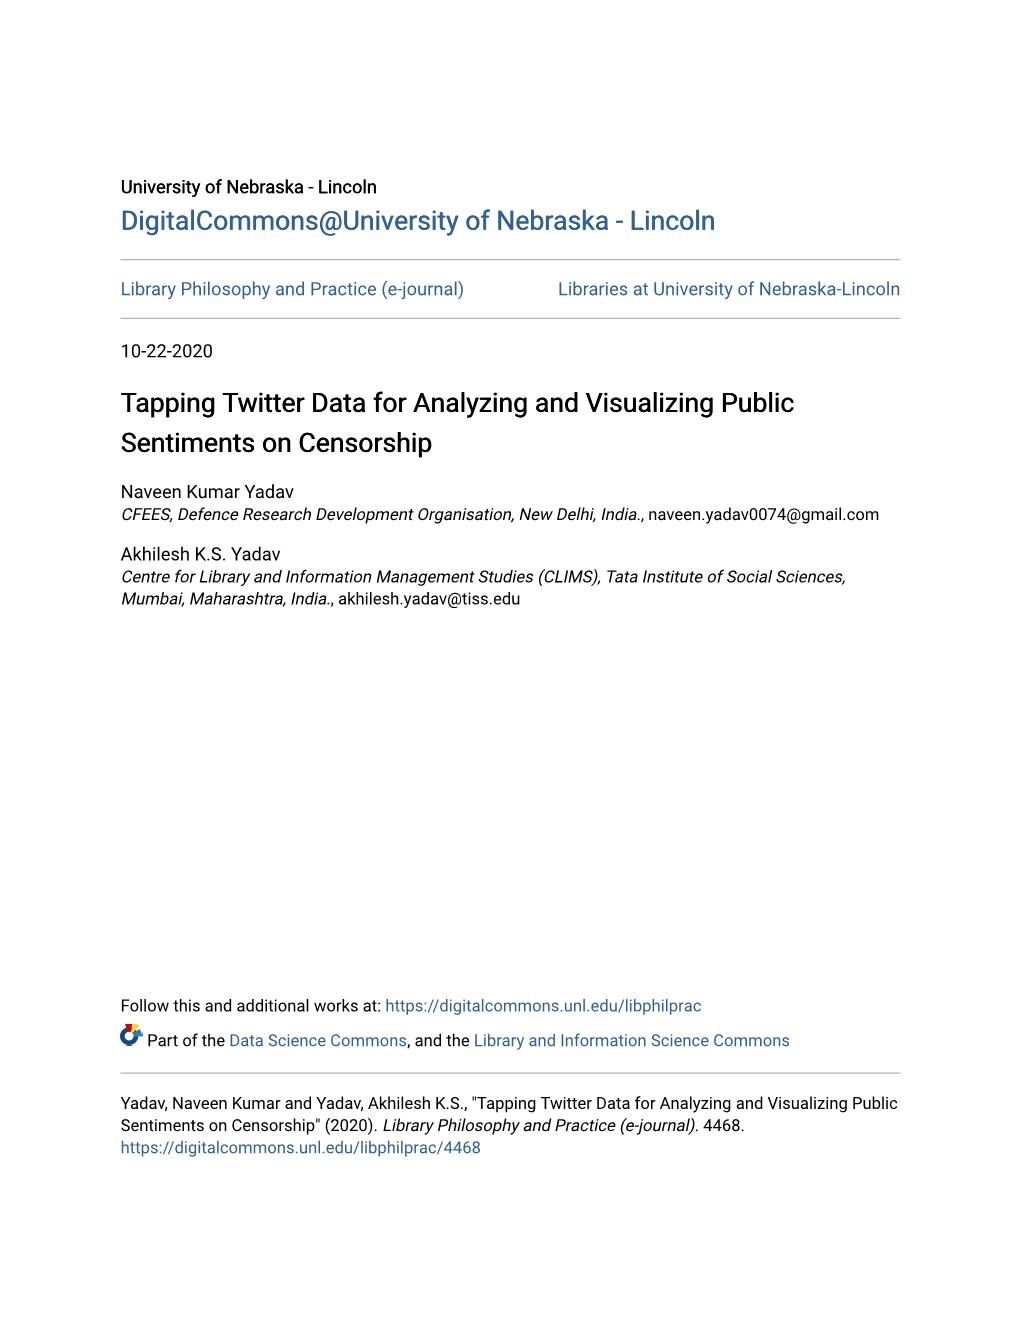 Tapping Twitter Data for Analyzing and Visualizing Public Sentiments on Censorship